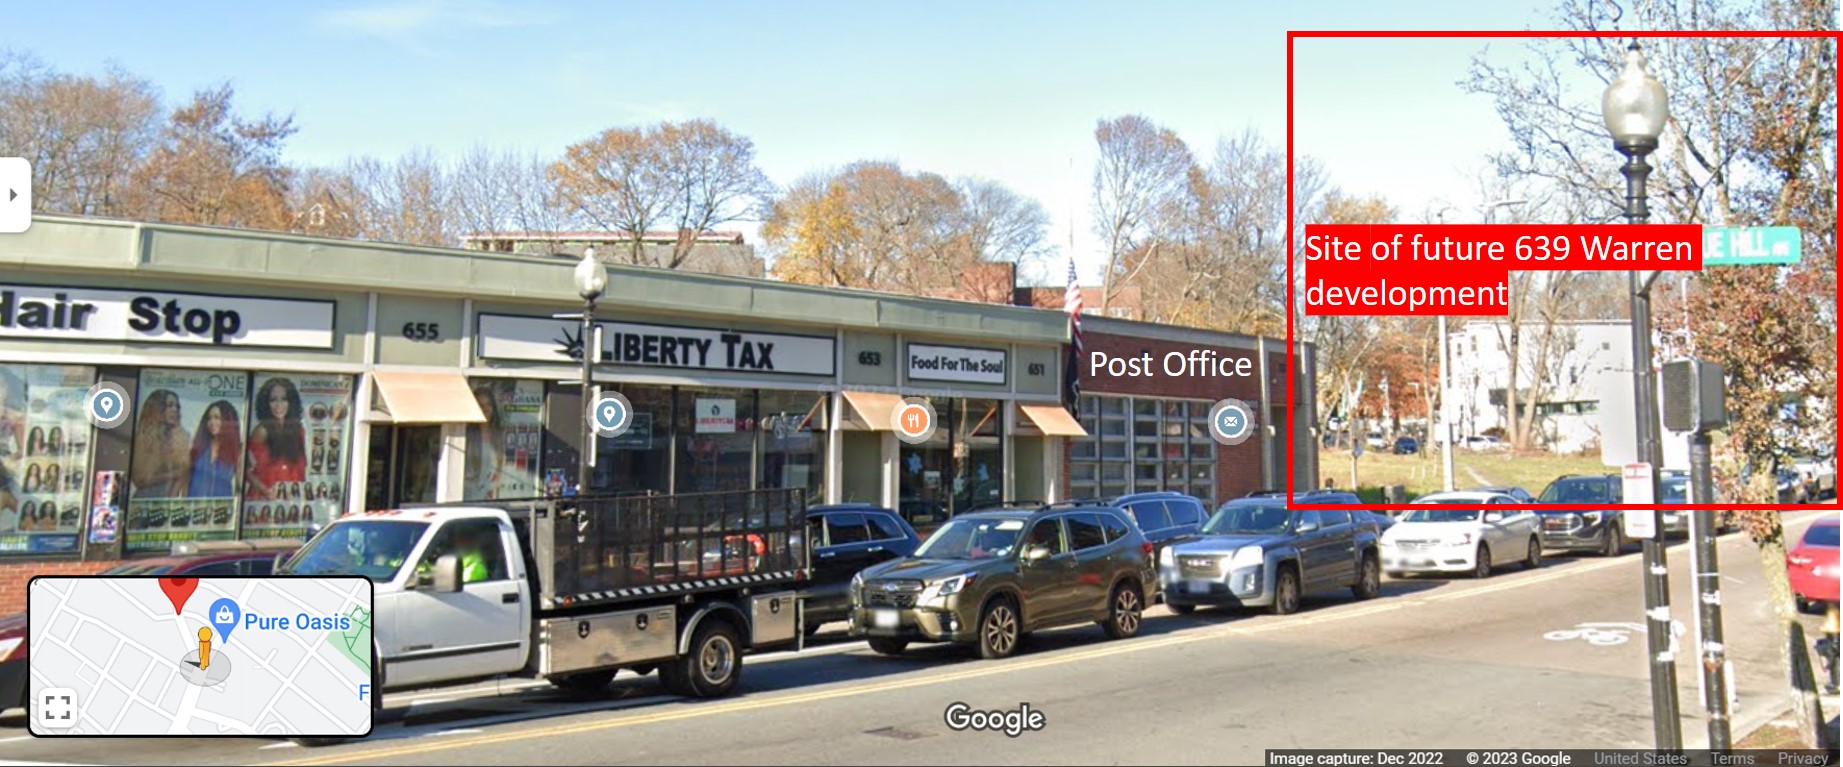 A screenshot from Google Maps displays a strip of one-story commercial buildings along Warren Street by the corner of Blue Hill Avenue leading up to the vacant lot at 639 Warren Street. A red box drawn onto the image highlights the vacant lot and is labeled "Site of future 639 Warren development". The post office directly to the left of the site is also labeled.